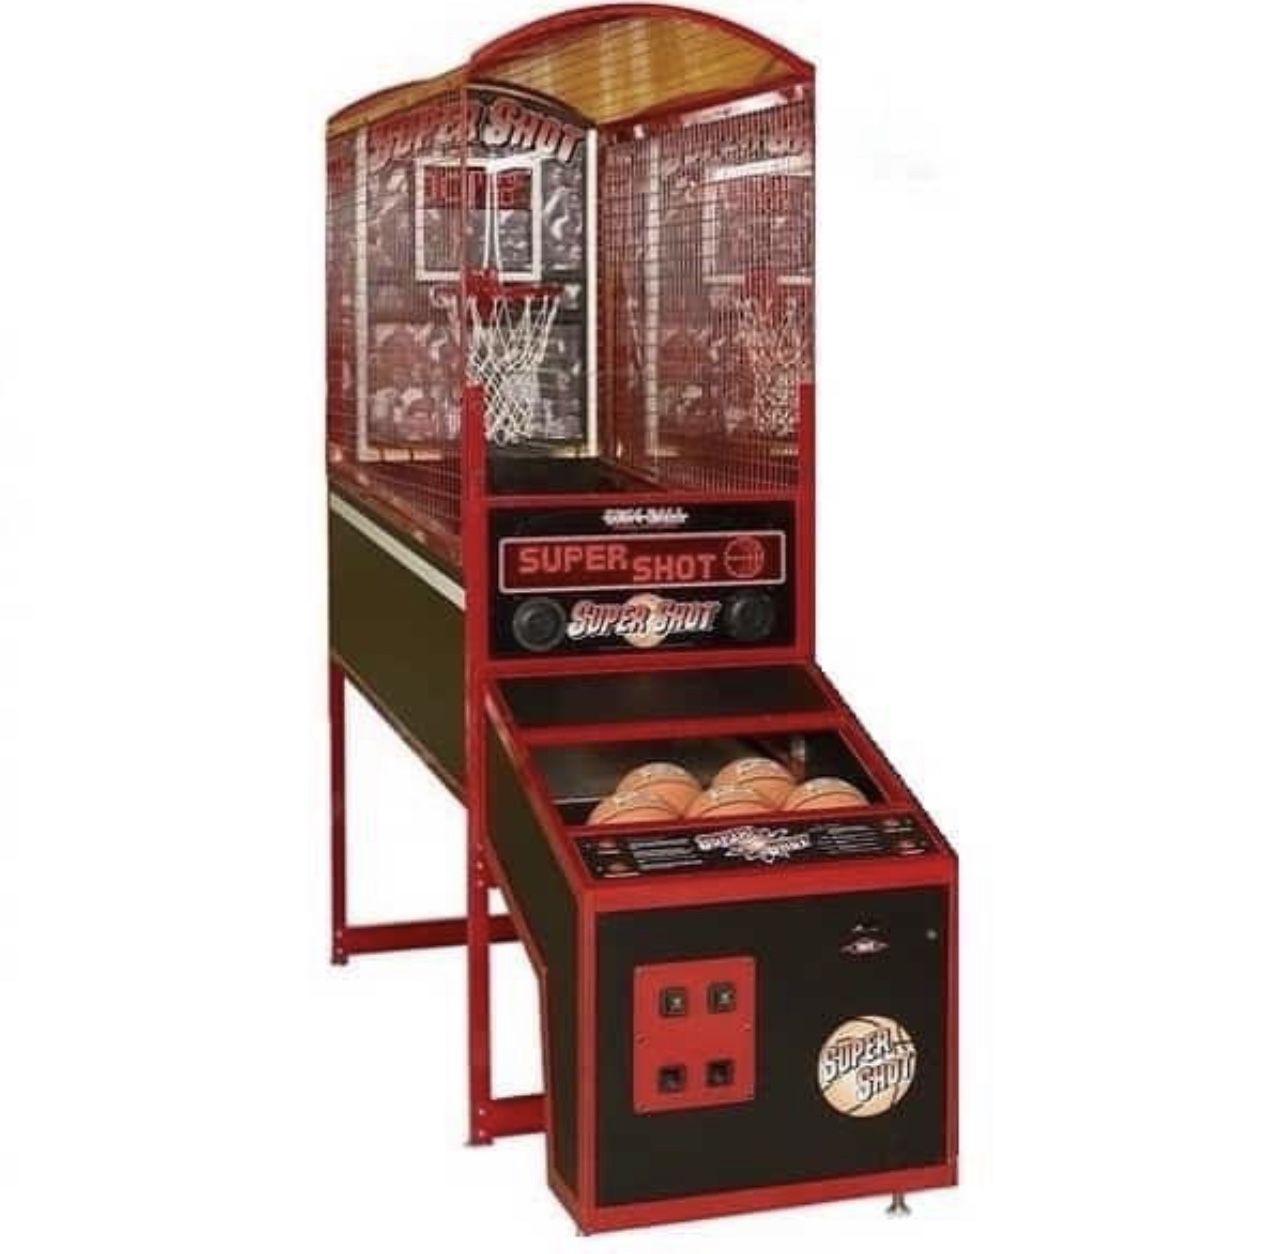 SUPERSHOT BASKETBALL MACHINE by SKEEBALL Excellent Condition Rare